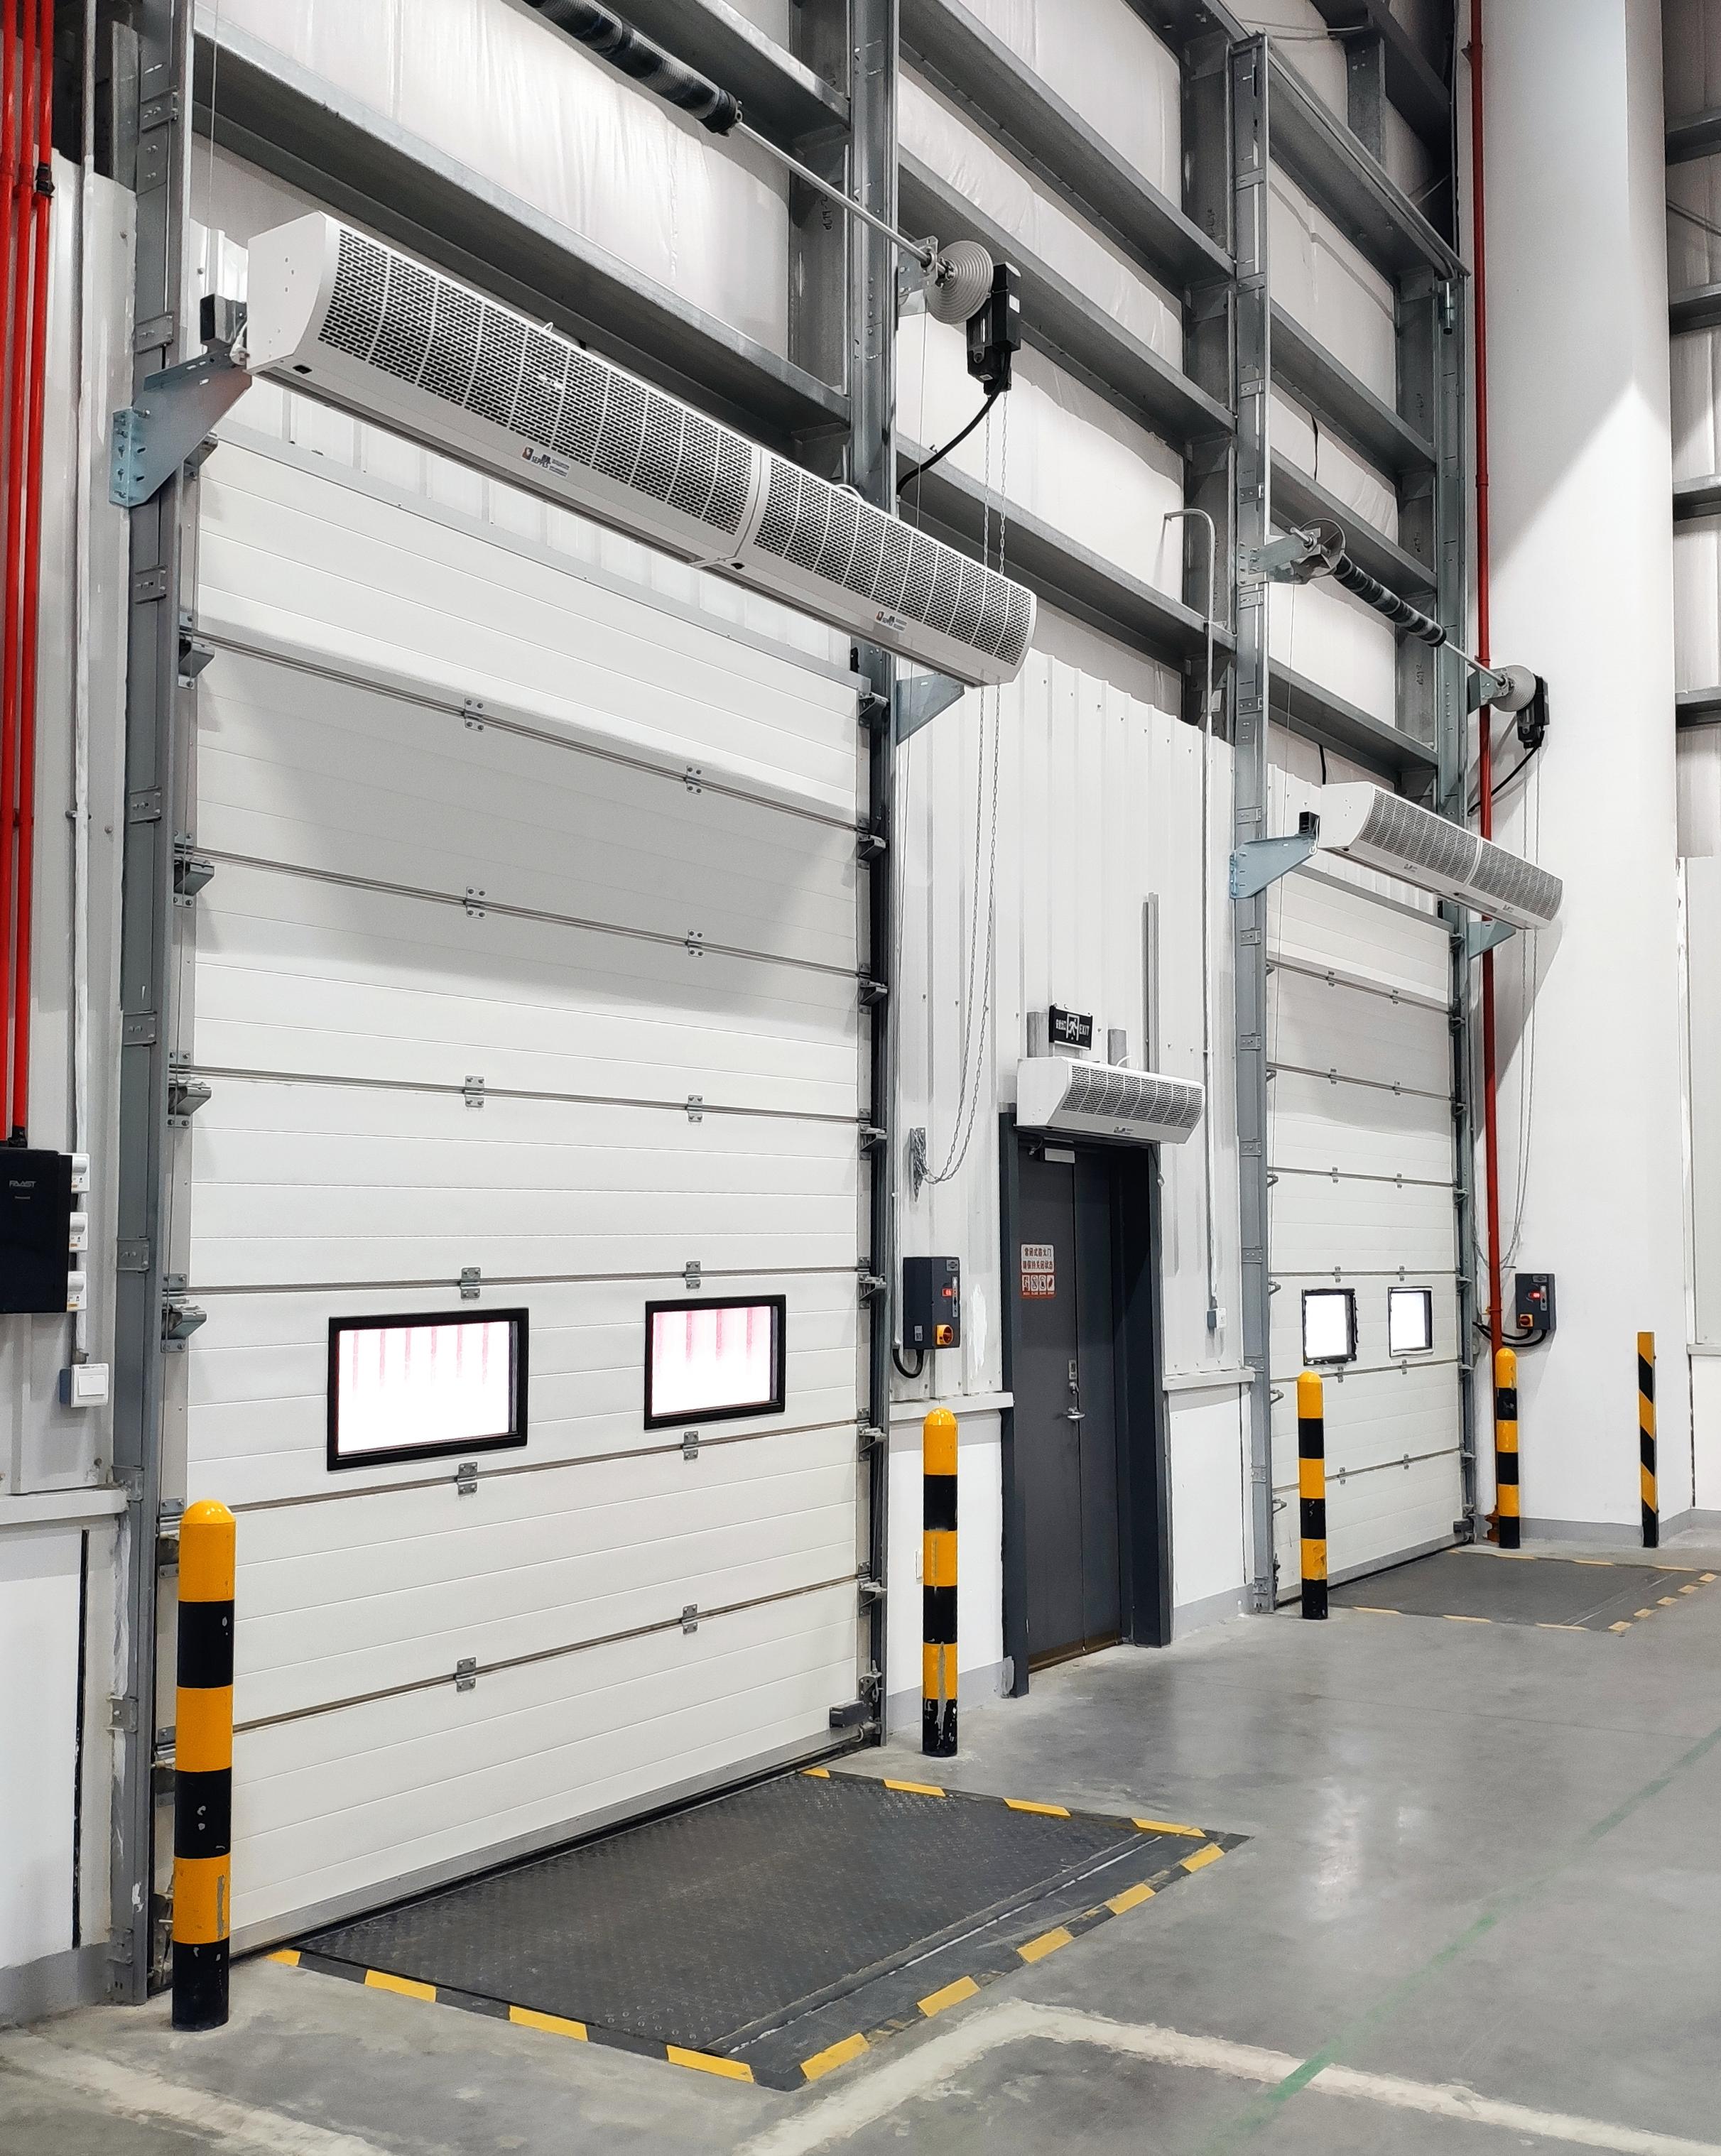 Benefits of installing industrial sectional door at freight stations